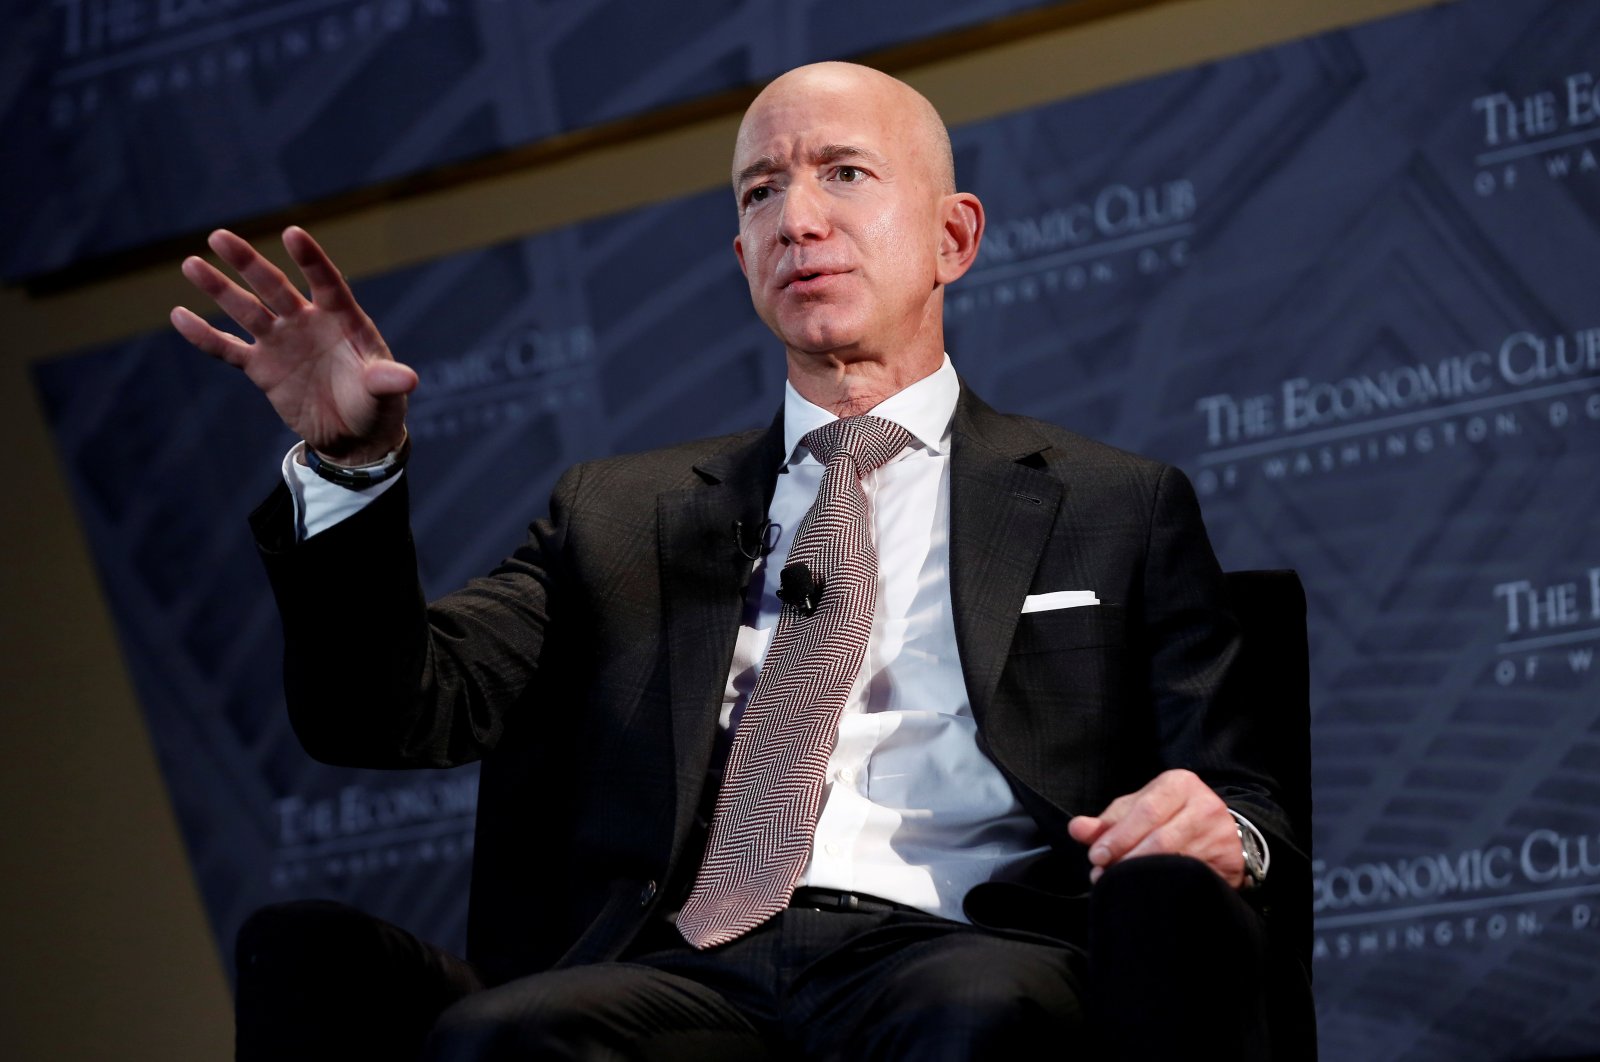 Jeff Bezos, president and CEO of Amazon and owner of The Washington Post, speaks at the Economic Club of Washington D.C.'s "Milestone Celebration Dinner" in Washington D.C., U.S., Sept. 13, 2018. (Reuters File Photo)